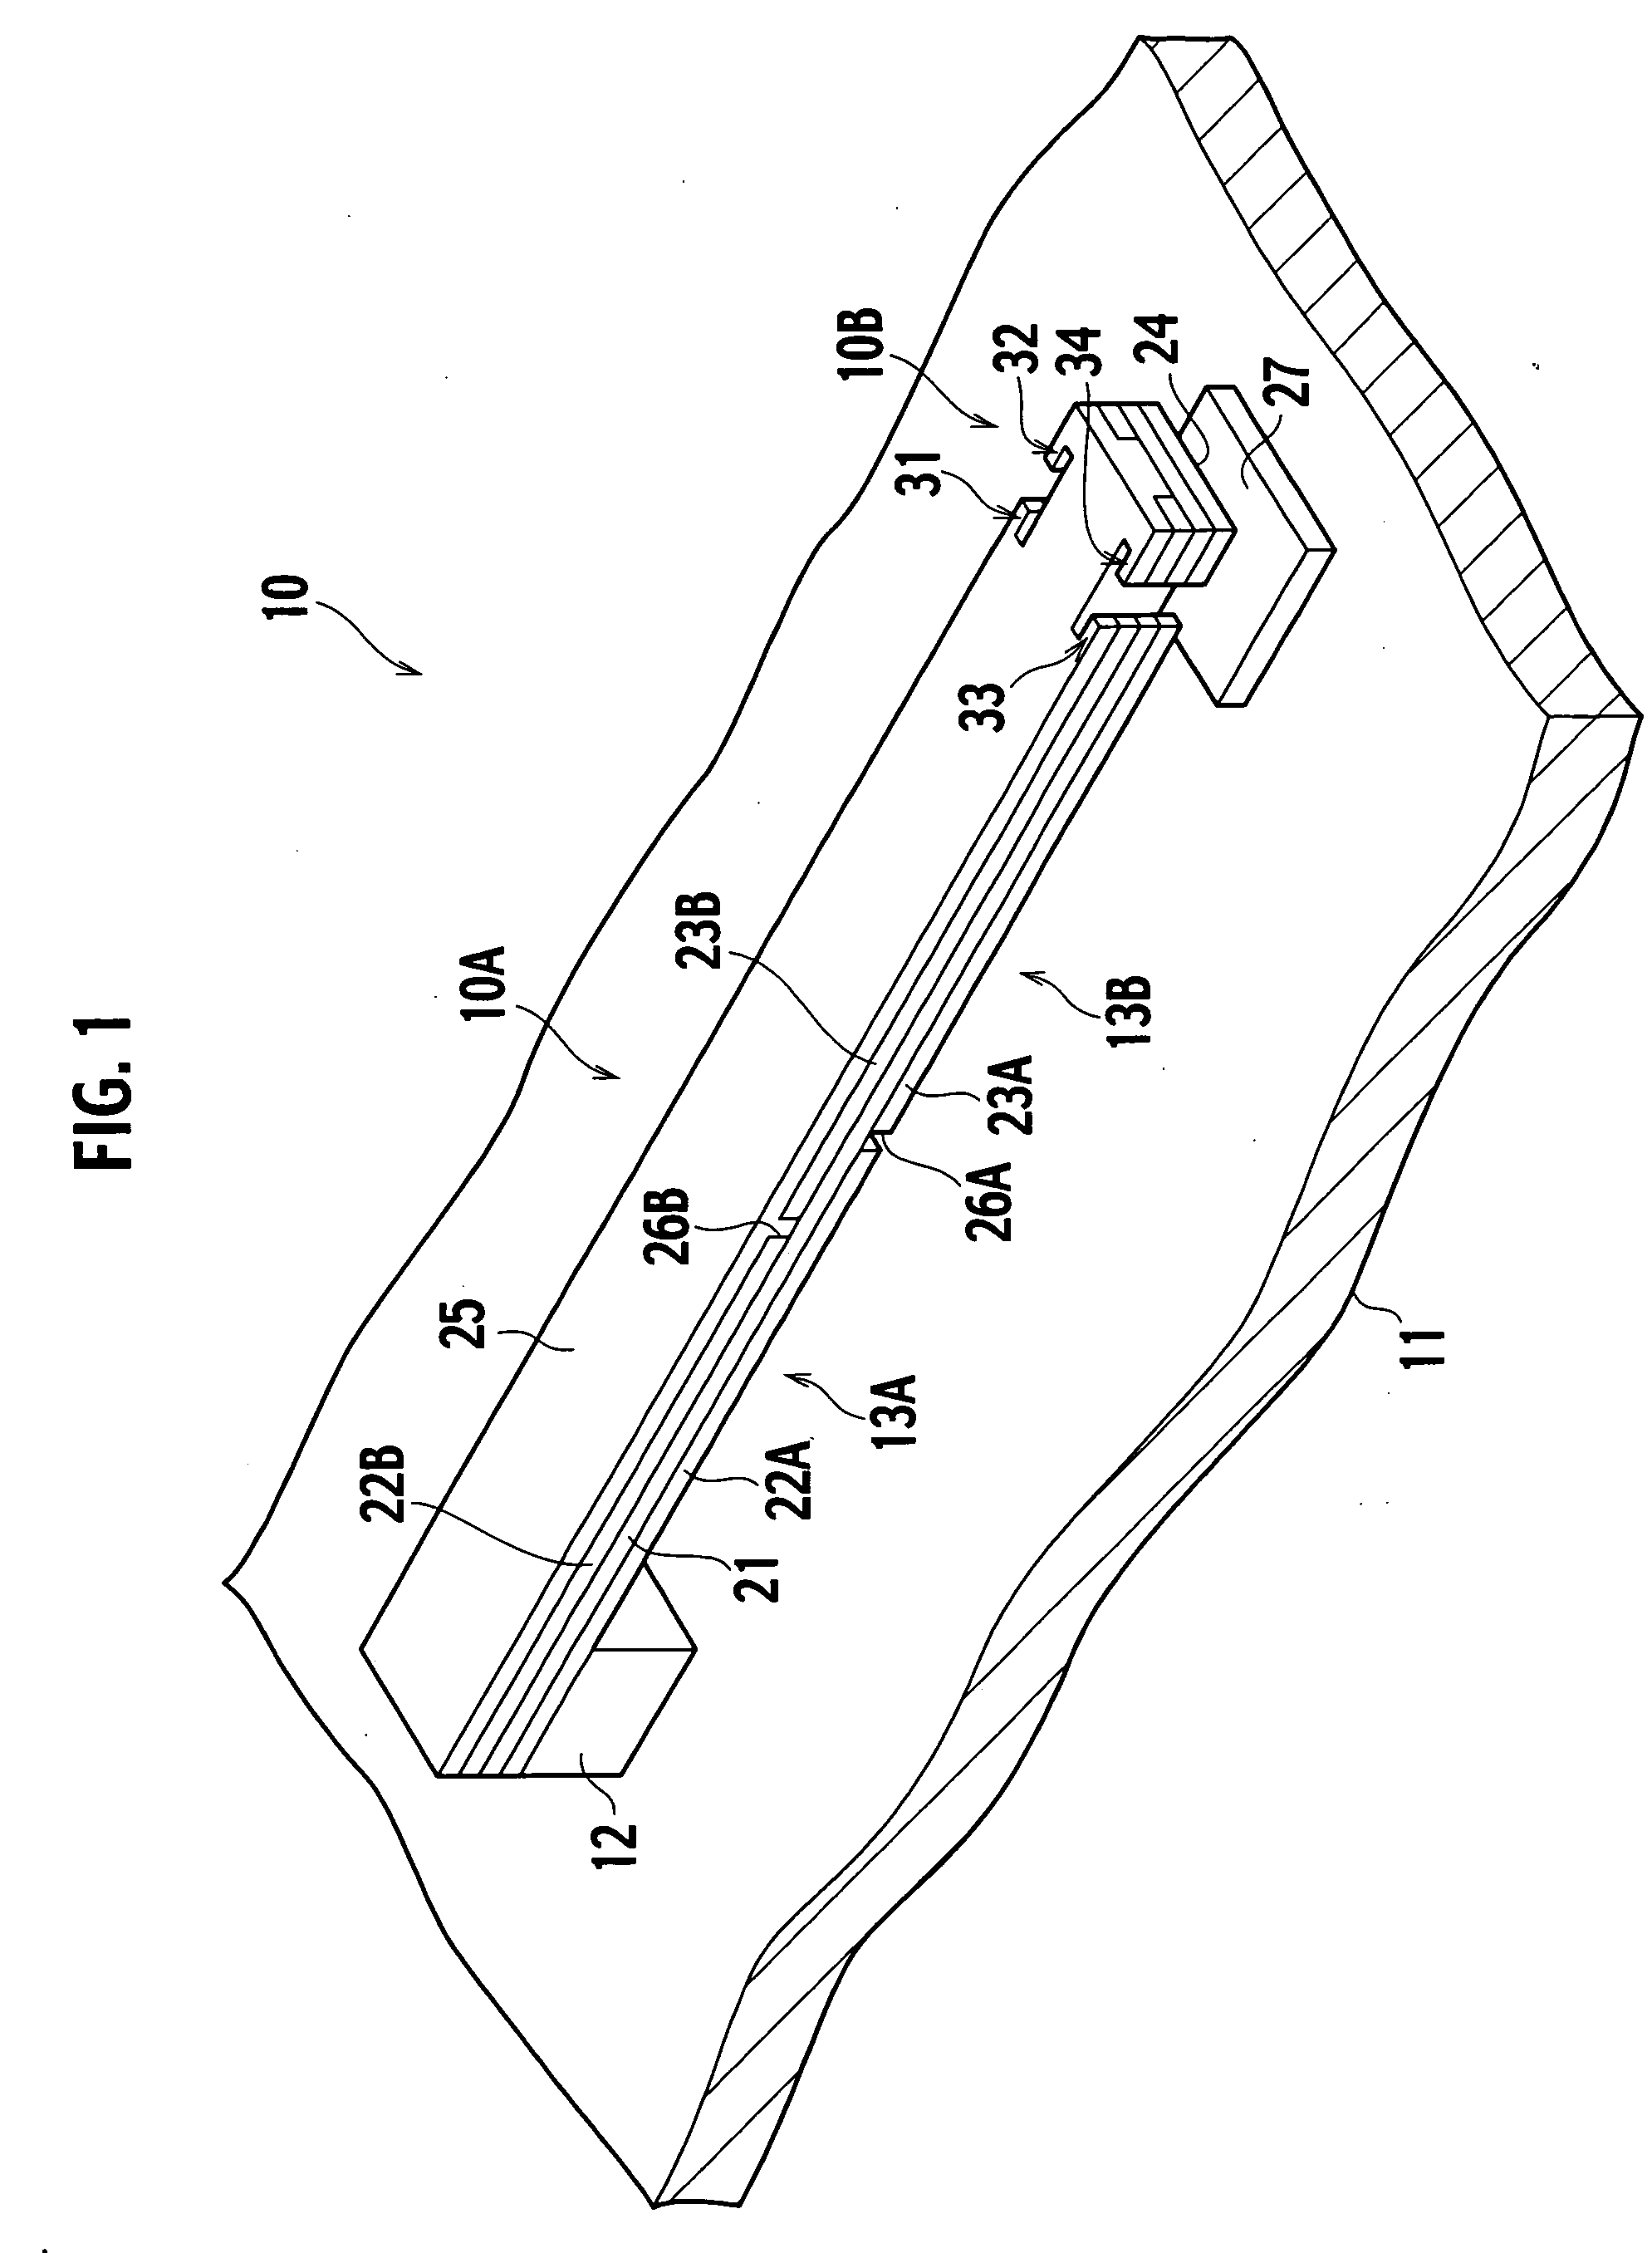 Micro-mechanical device, micro-switch, variable capacitor high frequency circuit and optical switch